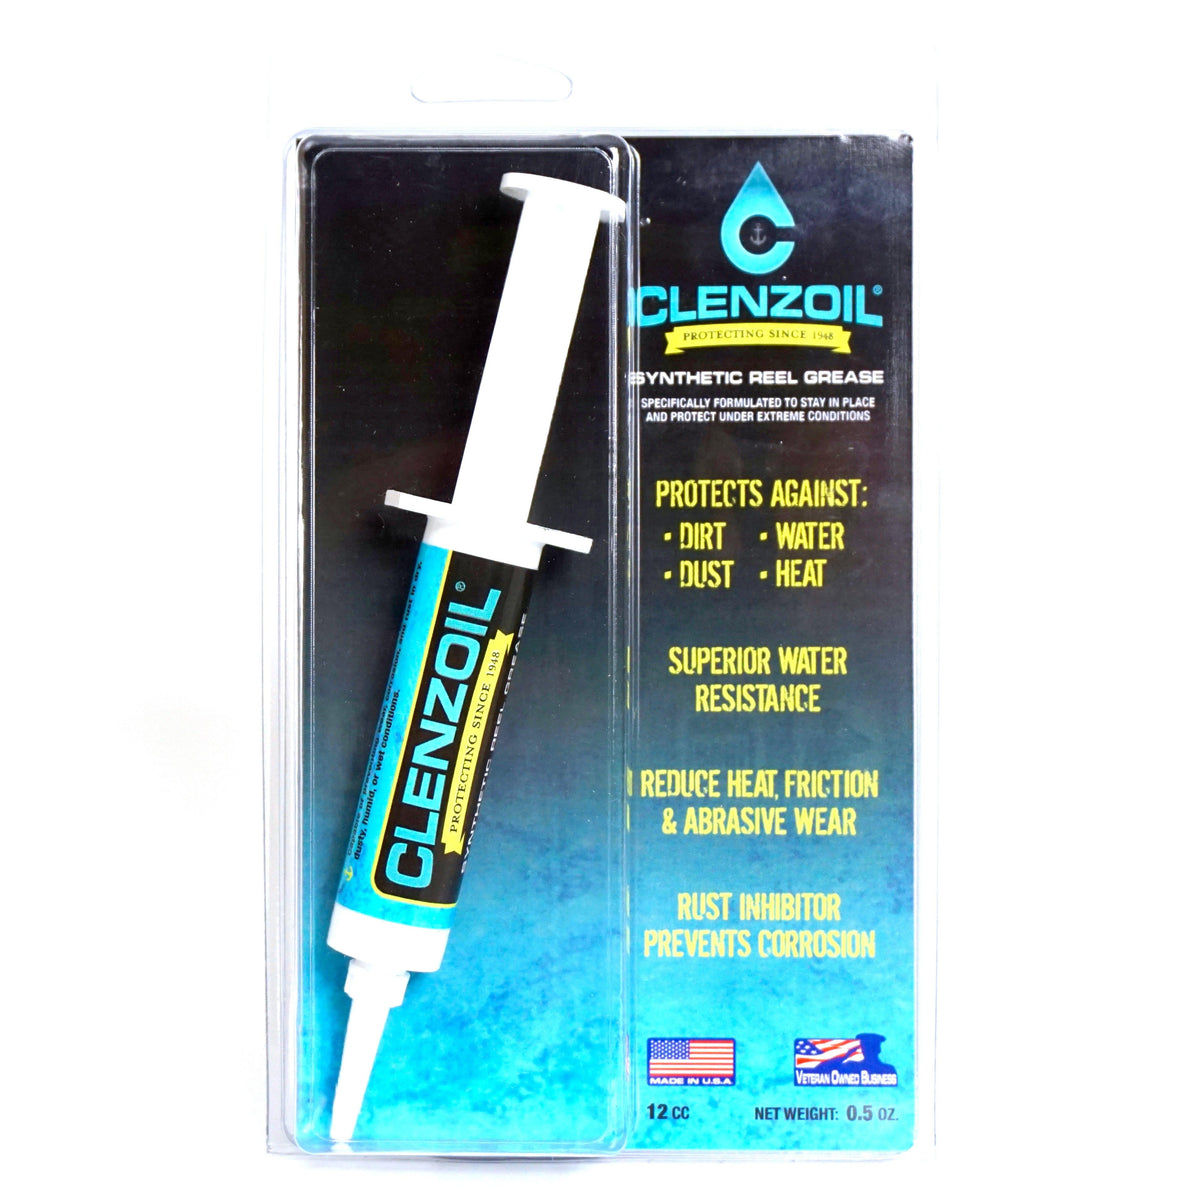 Synthetic Reel Grease Syringe – Clenzoil